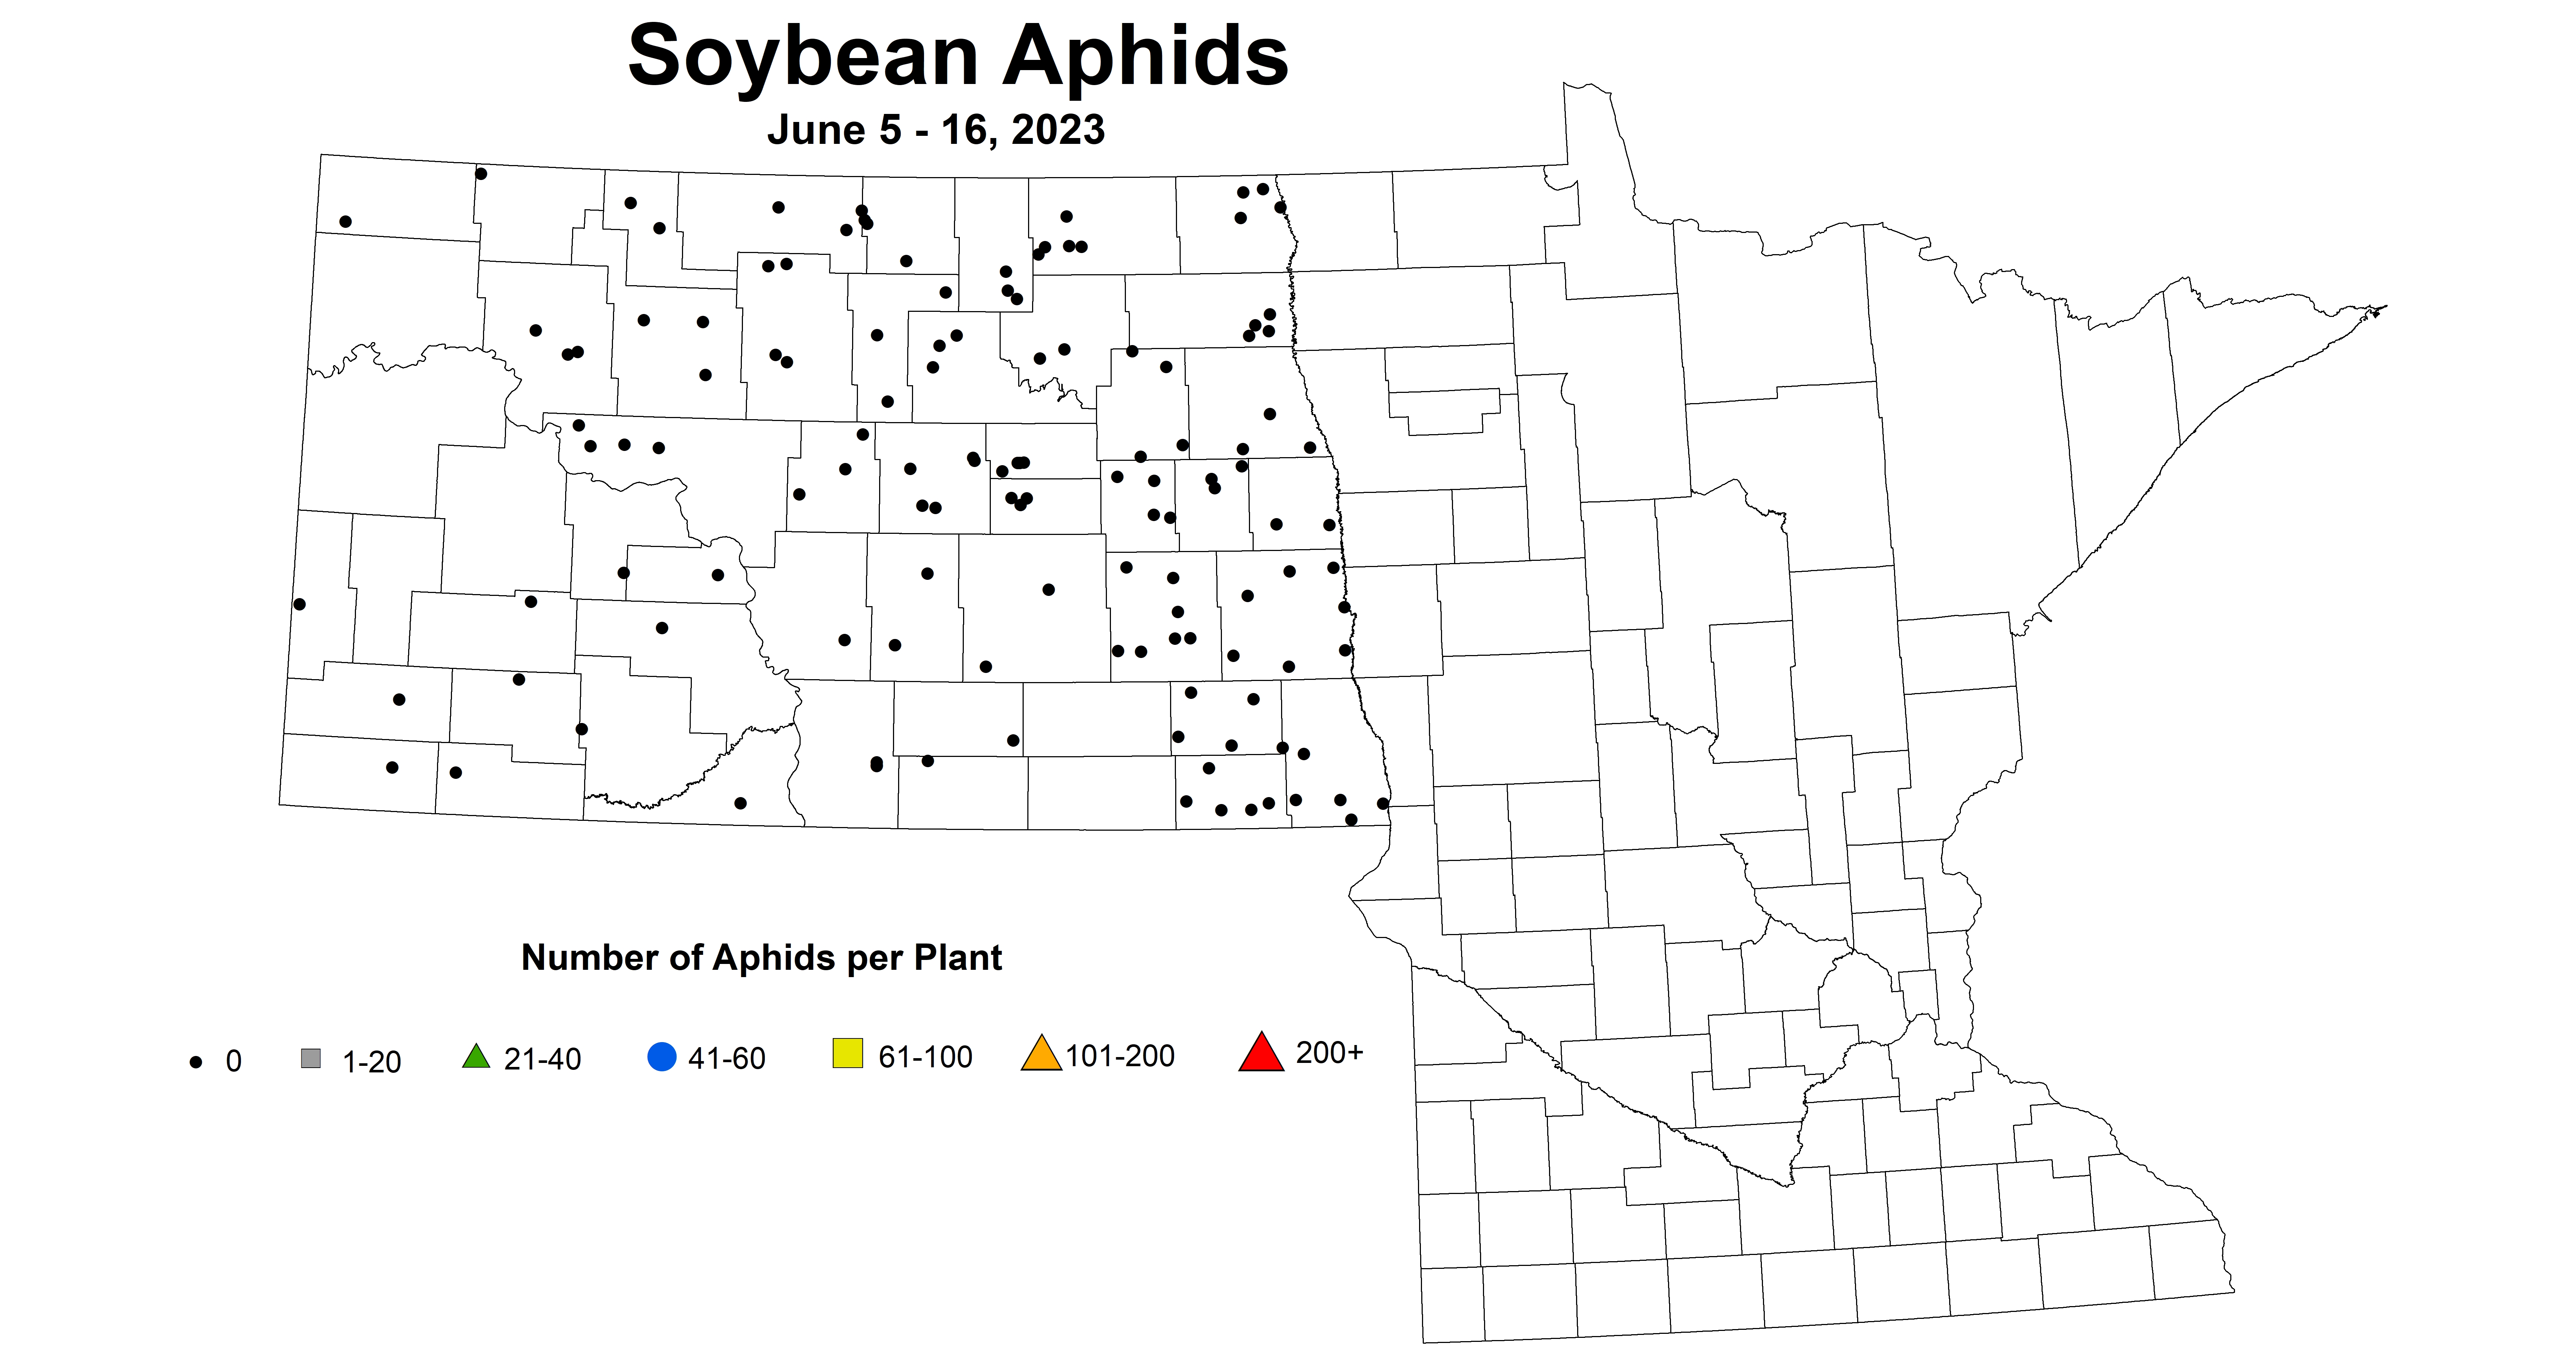 soybean aphids average number per plant June 5-16 2023